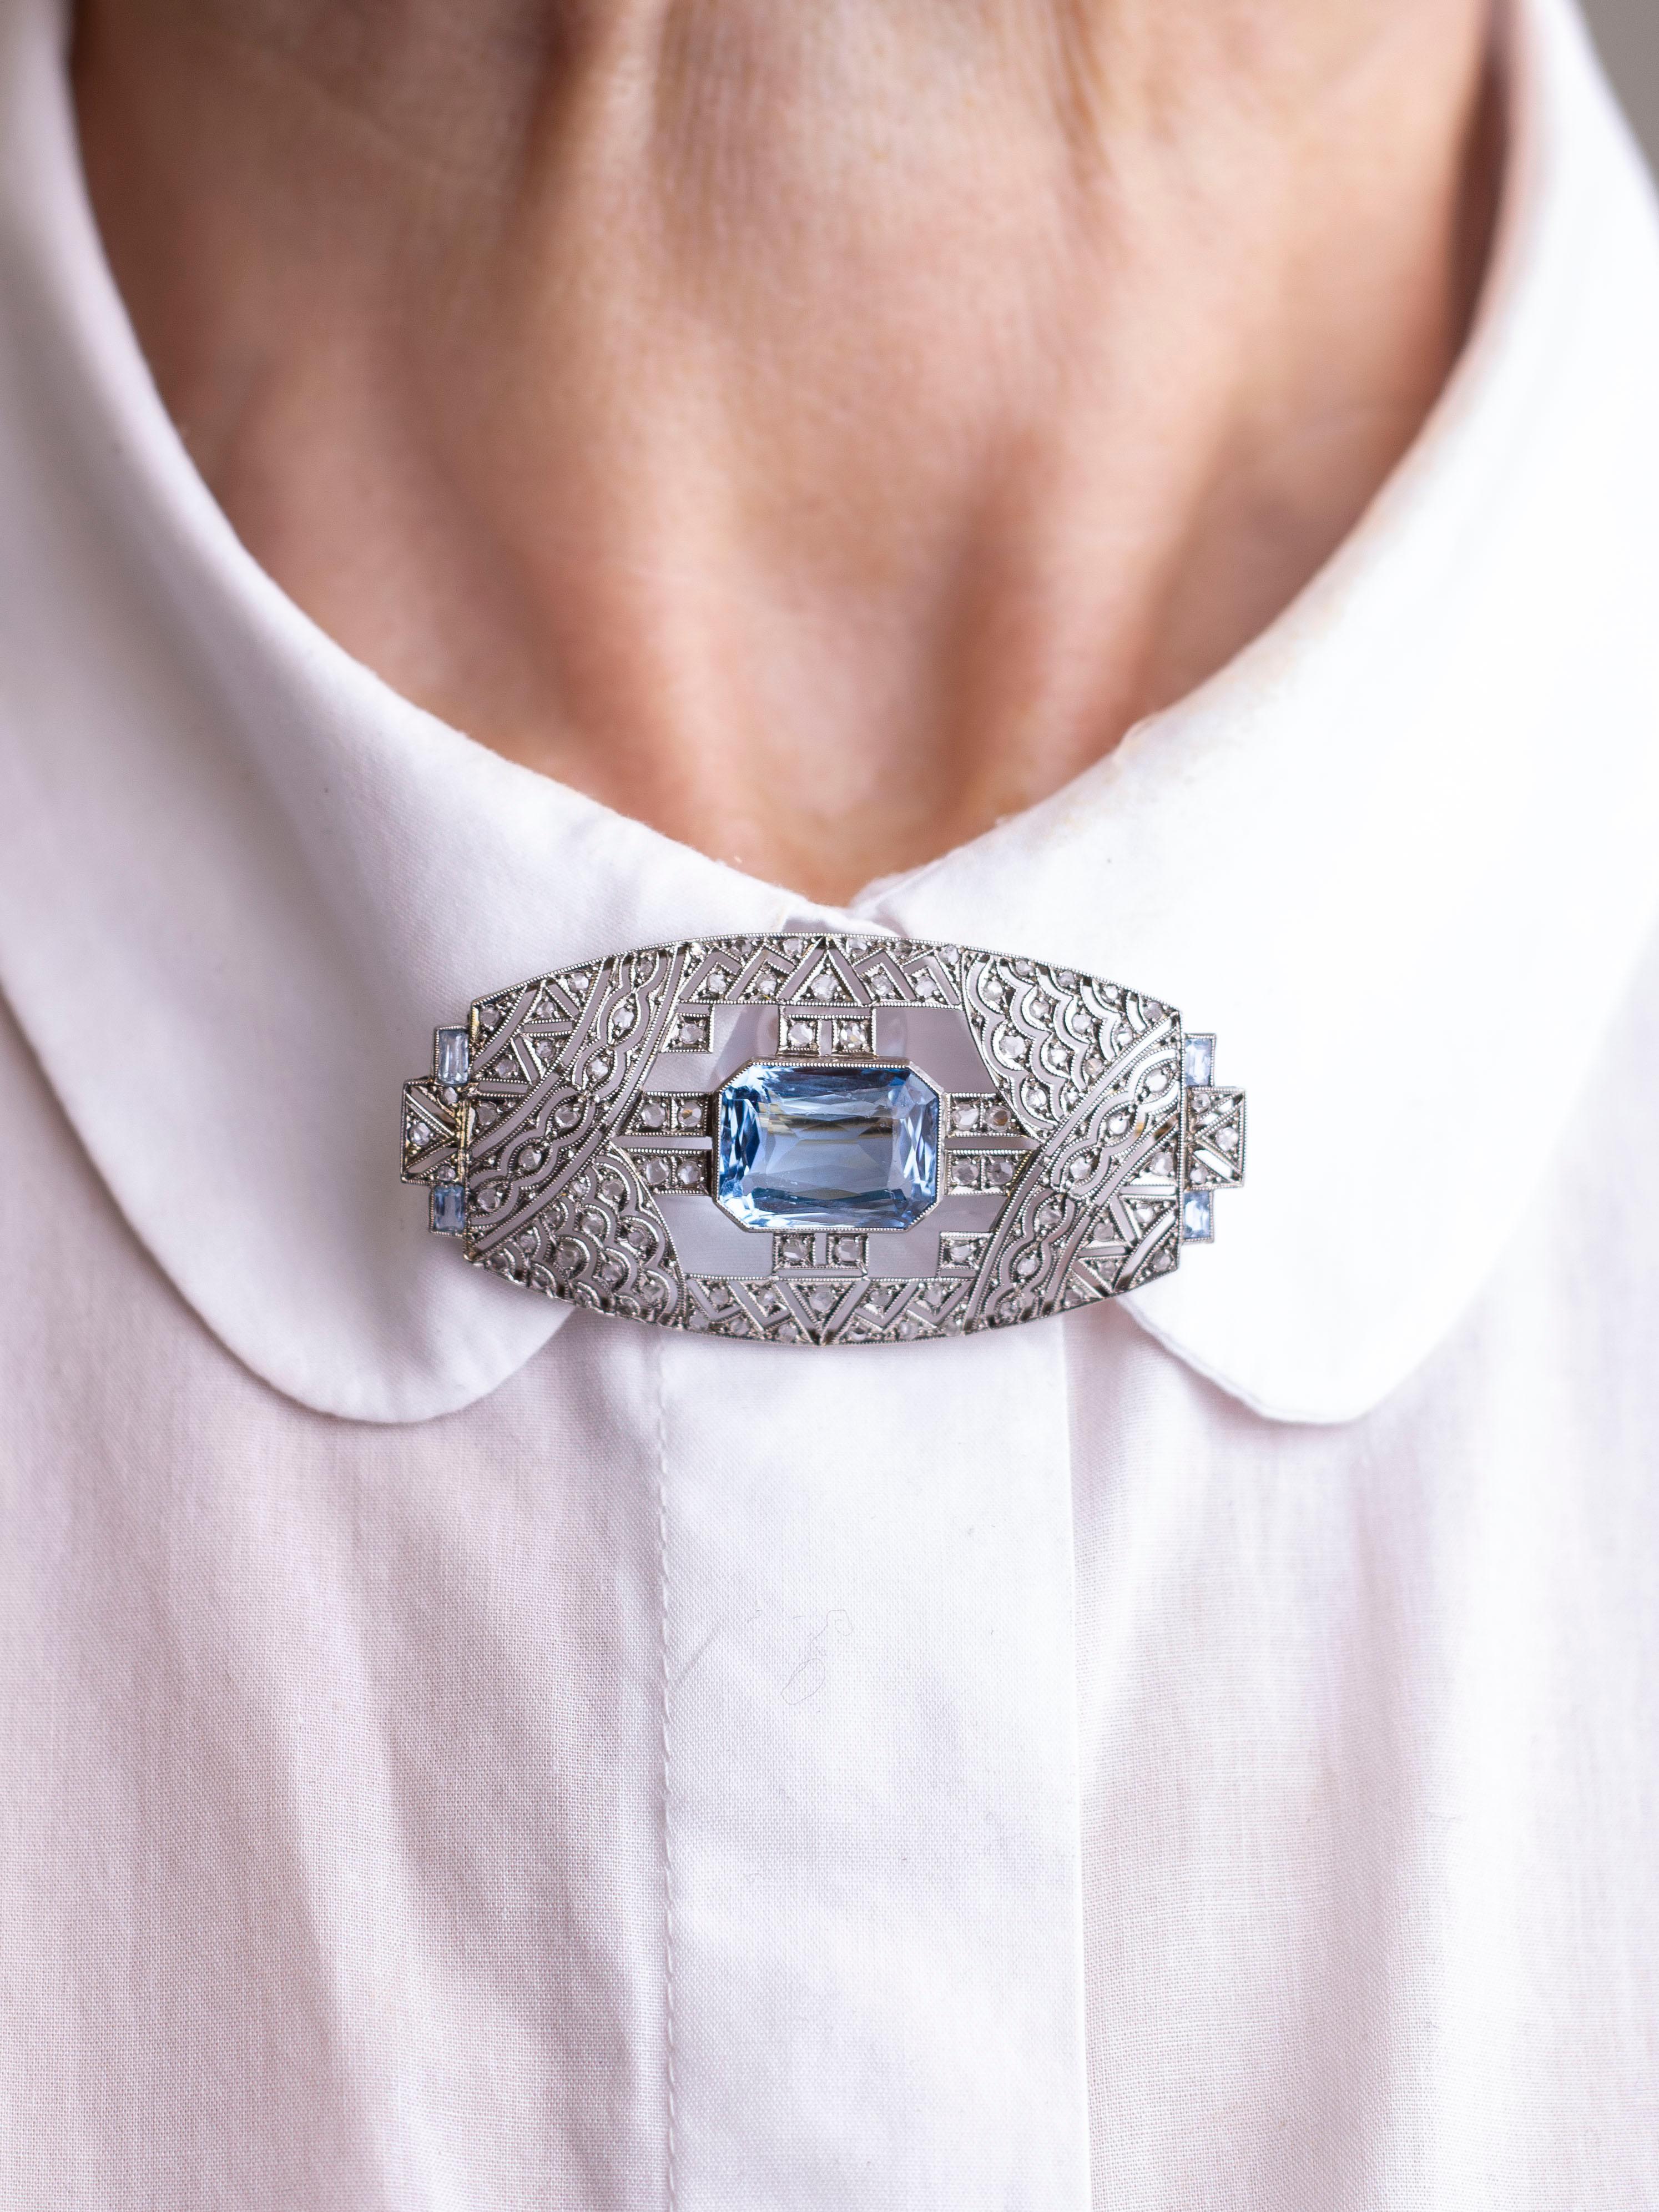 This stunning Art Deco brooch pin has been crafted from platinum and set with bright aquamarines and old cut diamonds. The central aquamarine is an emerald cut stone weighing 8.10 carats that has been rubover set. To the corners of the brooch are a